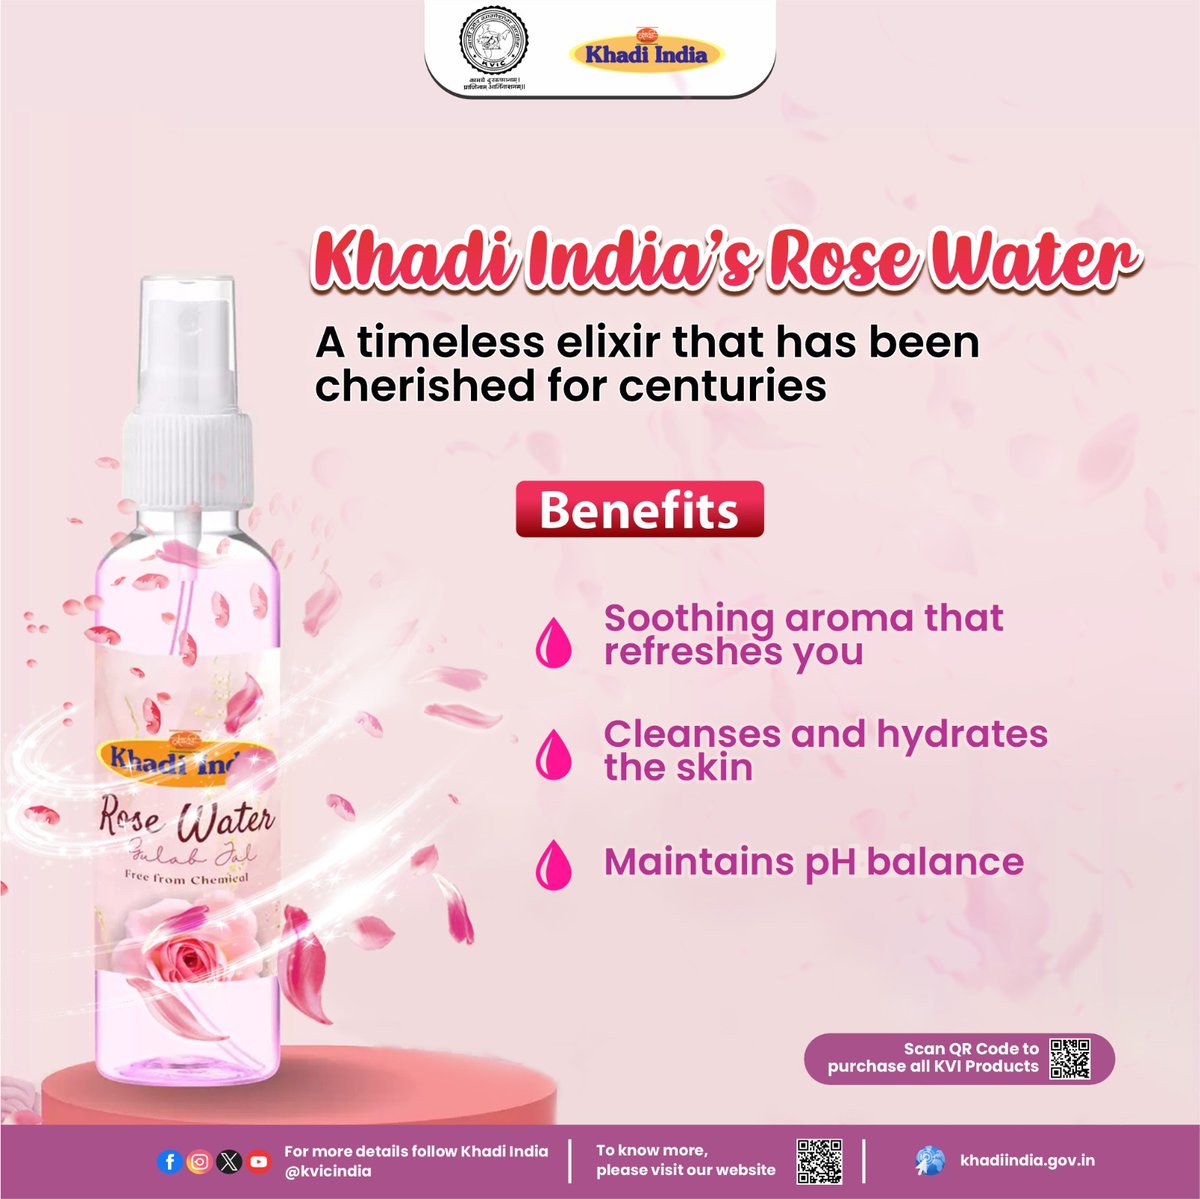 Sourced from the finest roses, this all-natural floral water is a versatile beauty and wellness essential that offers a myriad of benefits for your skin, hair, and overall well-being. Visit your nearest #Khadi store or purchase all #KVIProducts online at khadiindia.gov.in